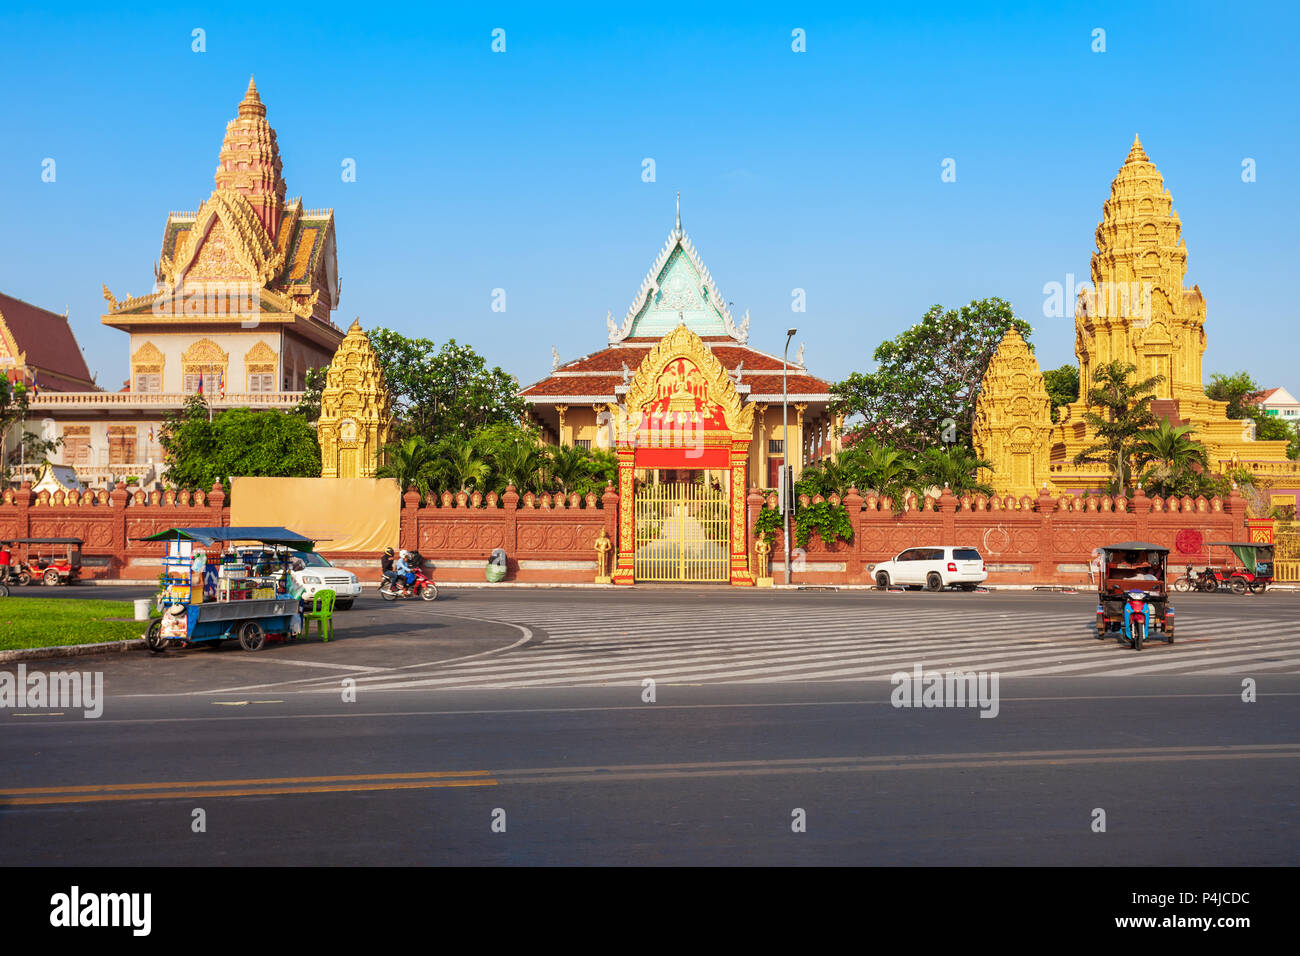 Wat Ounalom is a buddhist temple located on Sisowath Quay near the Royal Palace in Phnom Penh in Cambodia Stock Photo